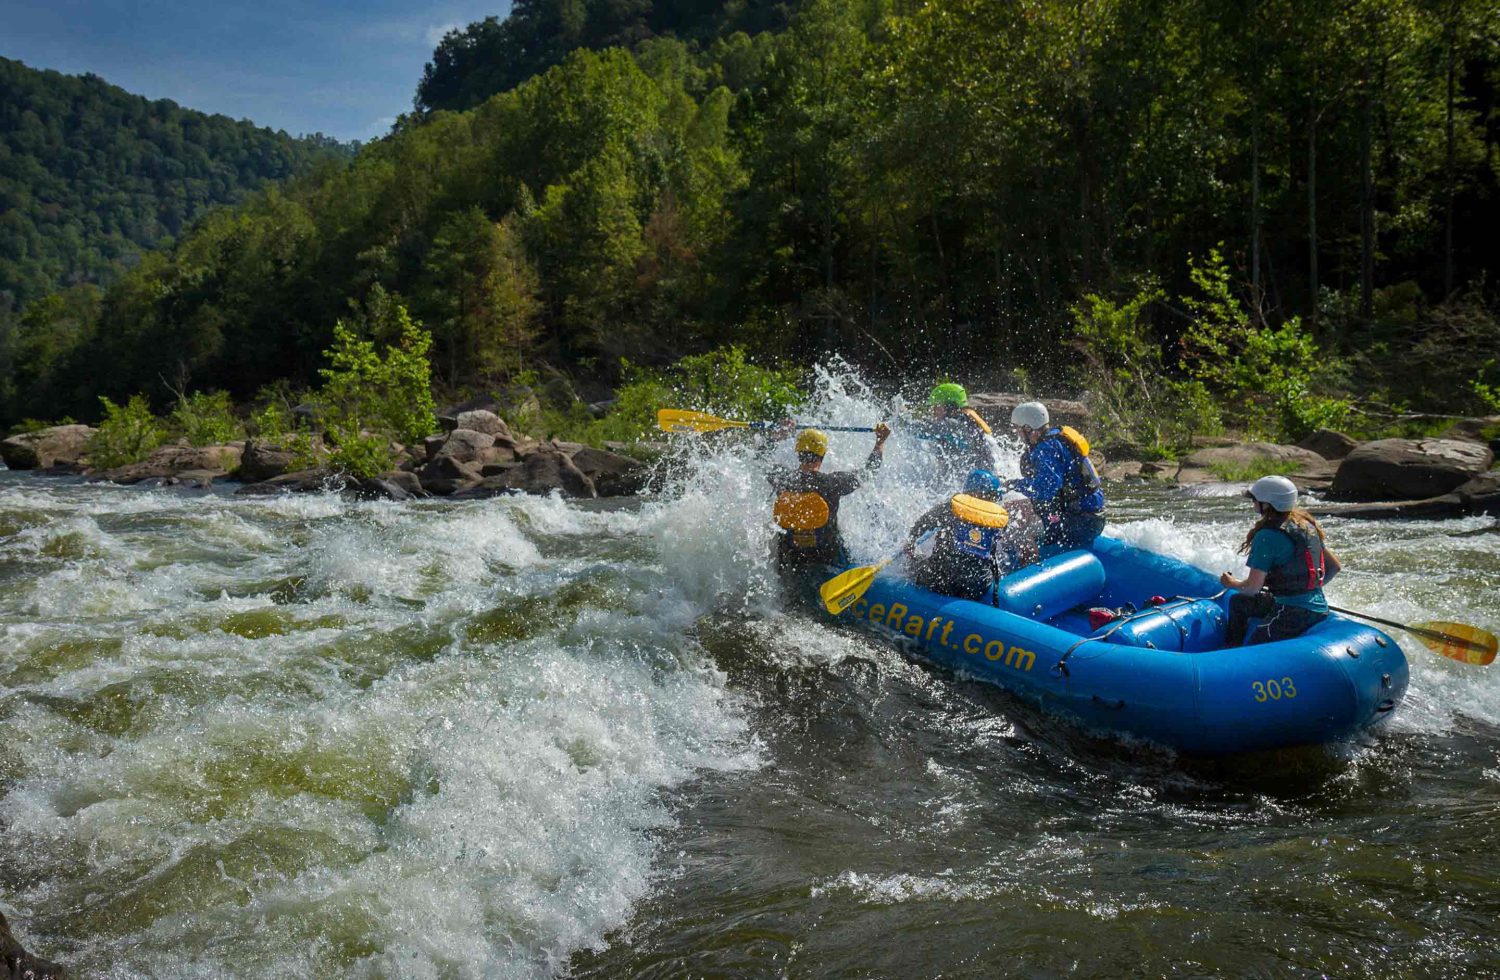 Fall Lower Gauley Full Day Whitewater Rafting Trip With Meals